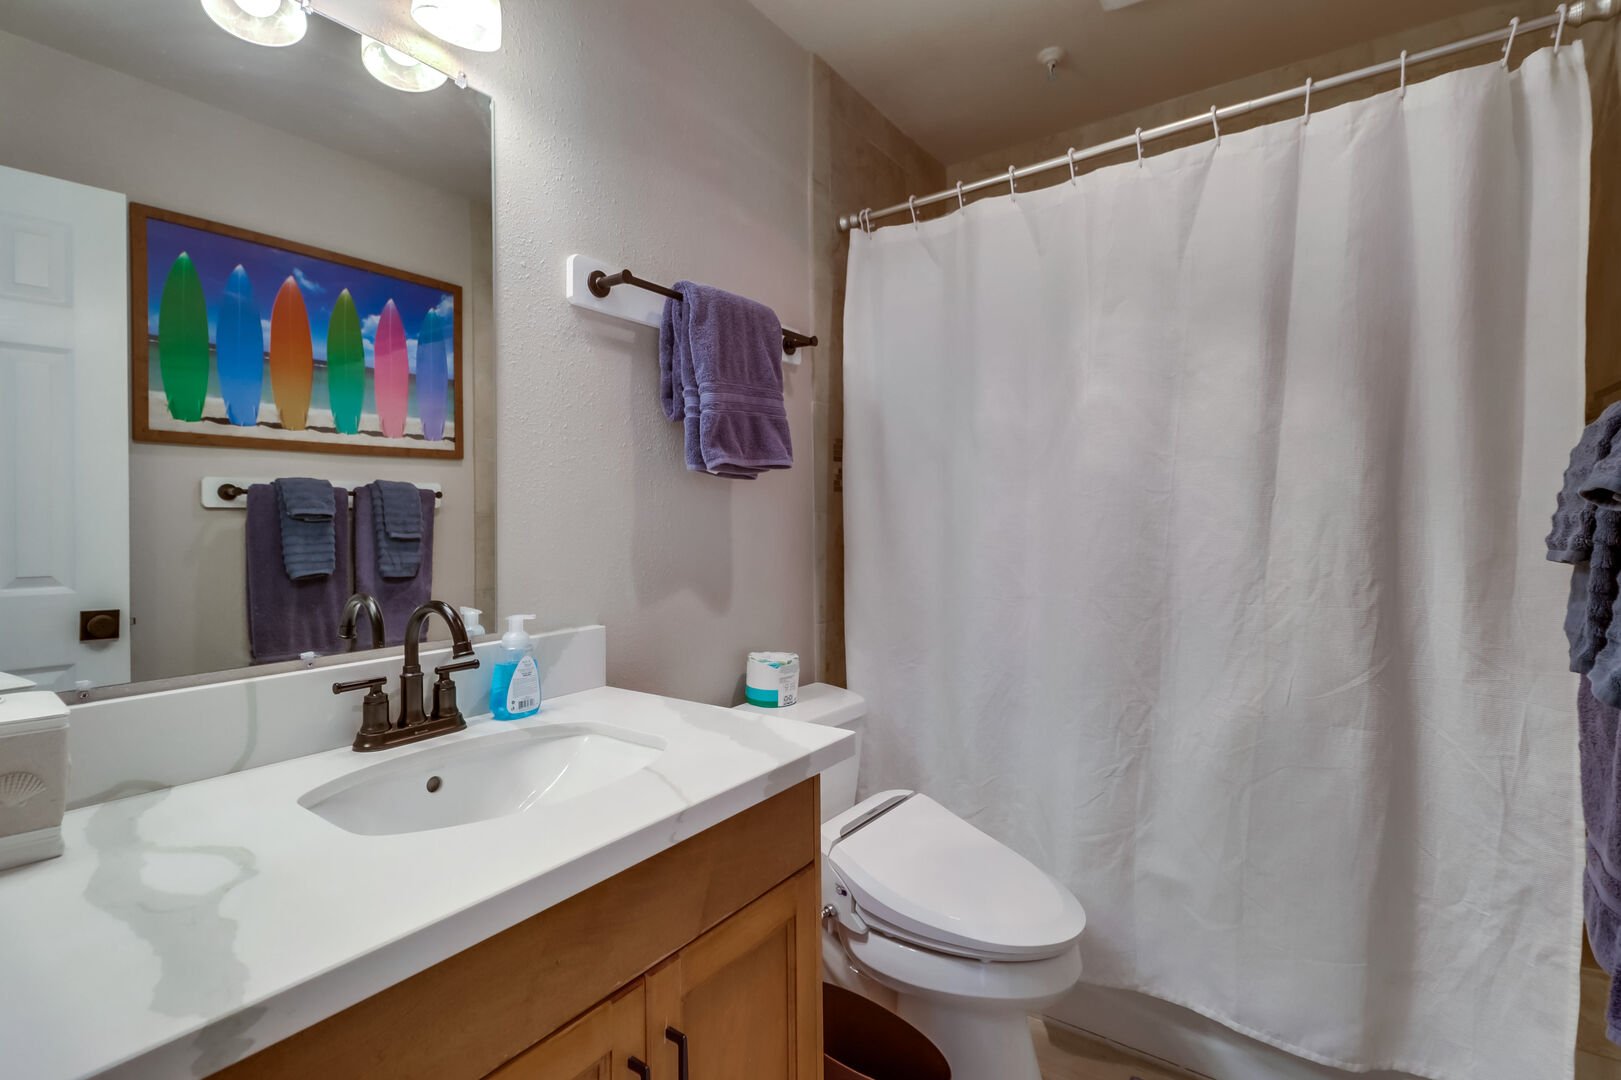 Shared bathroom with large vanity, recessed lighting and shower-tub combo